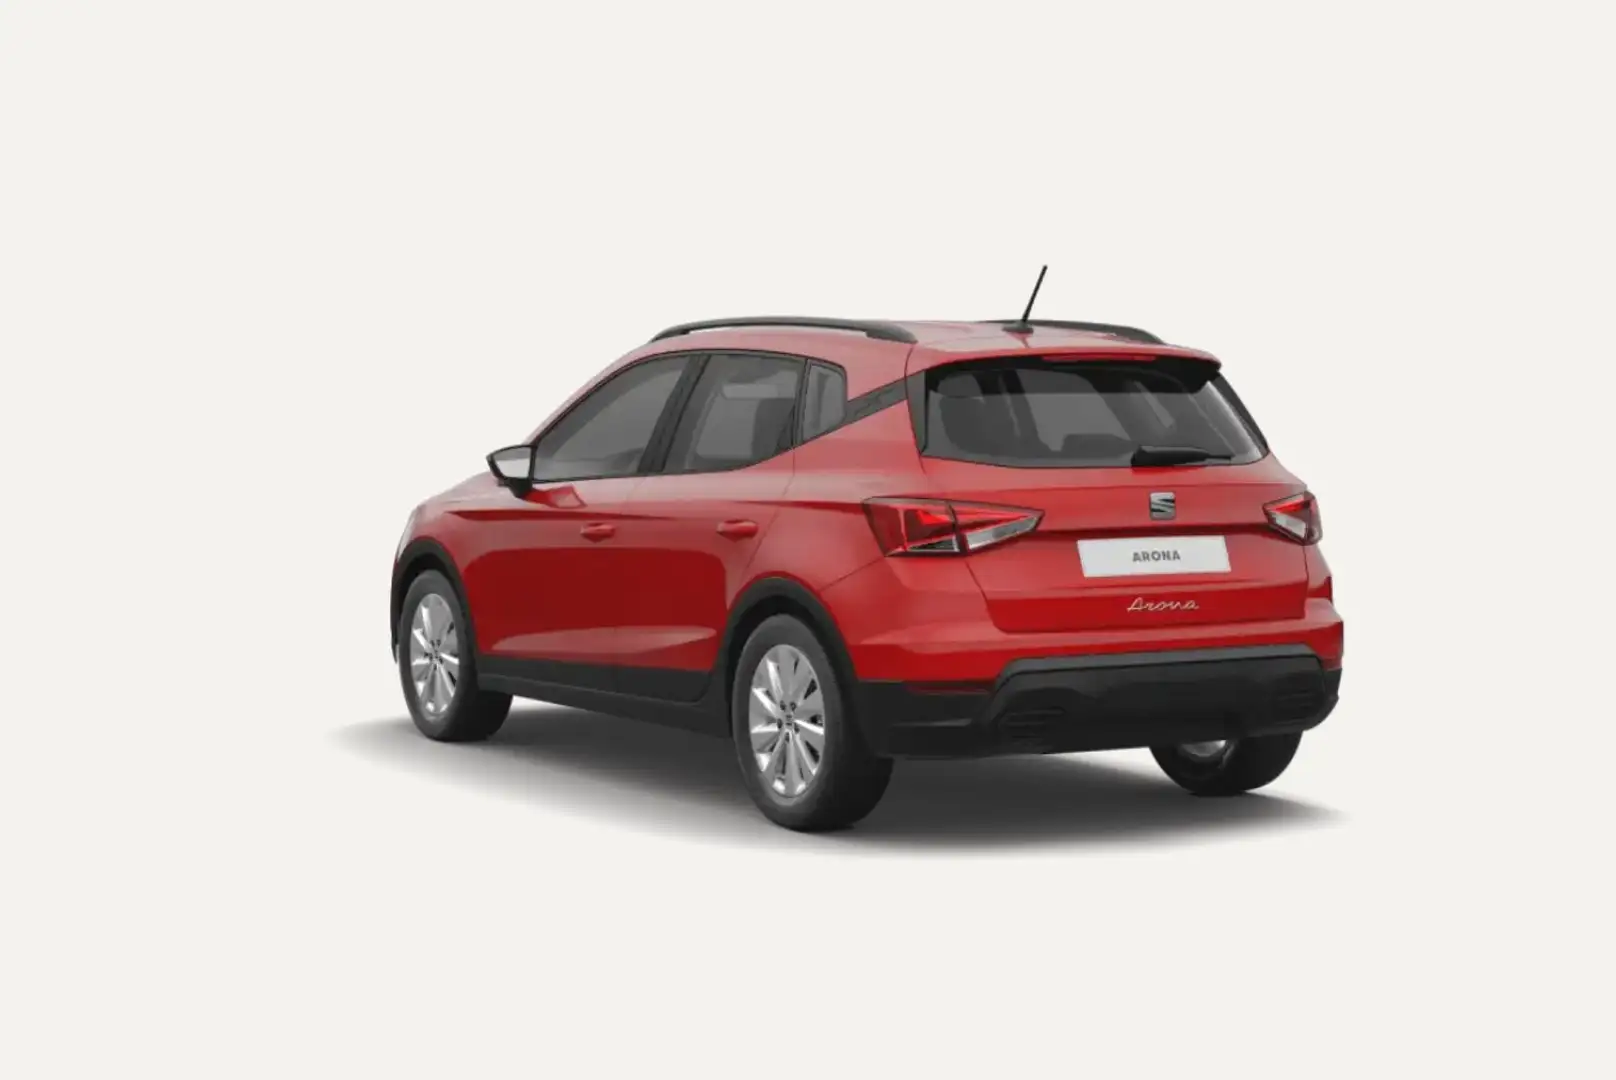 SEAT Arona 1.0 TSI 95pk Reference private lease 352,- Red - 2